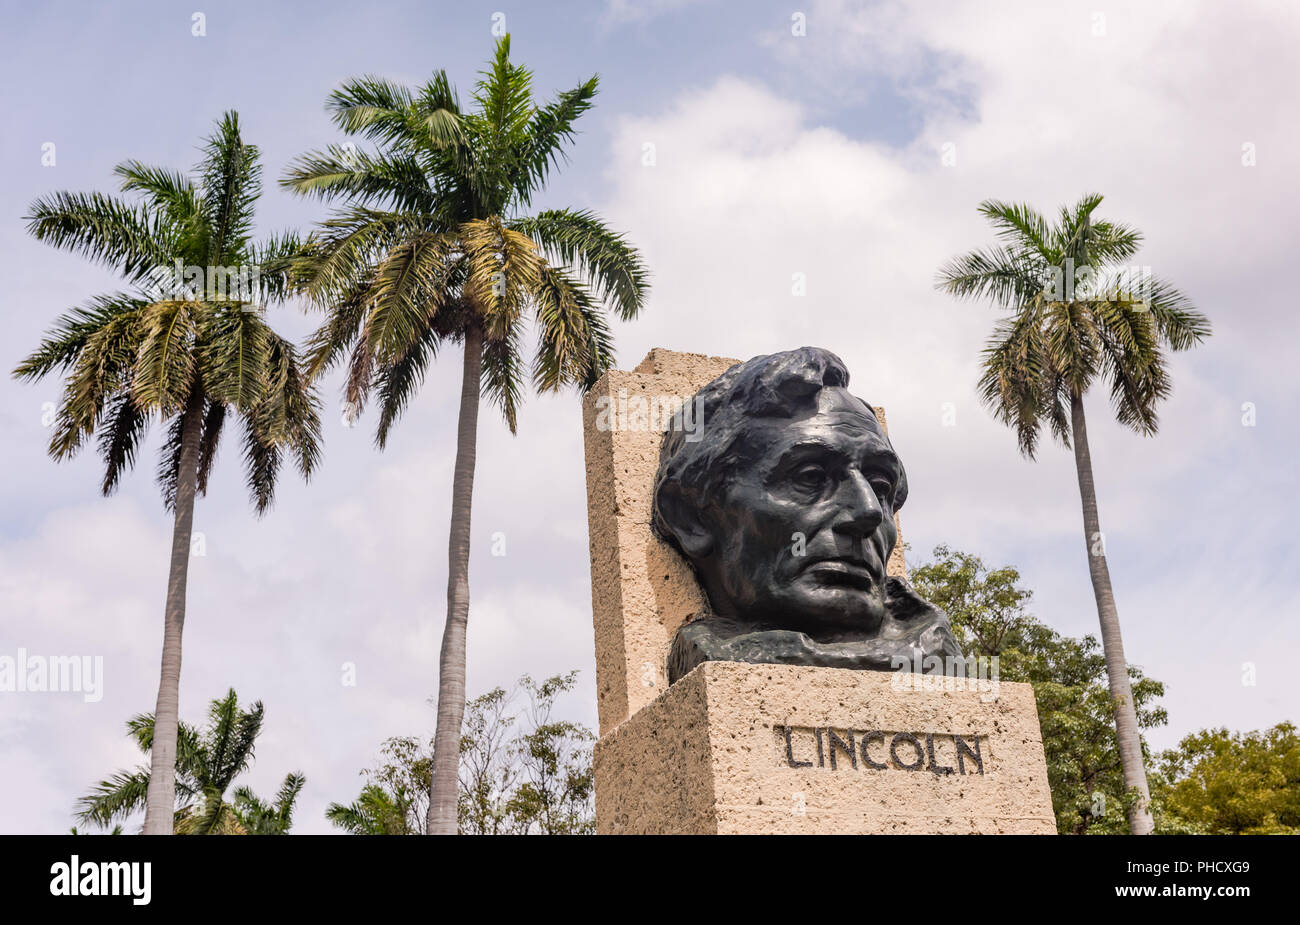 Bust of Abraham Lincoln in Havana, Cuba. The statue is located in the Pan-American Fraternity Park, symbolize of USA and Cuba relationship since 1927. Stock Photo